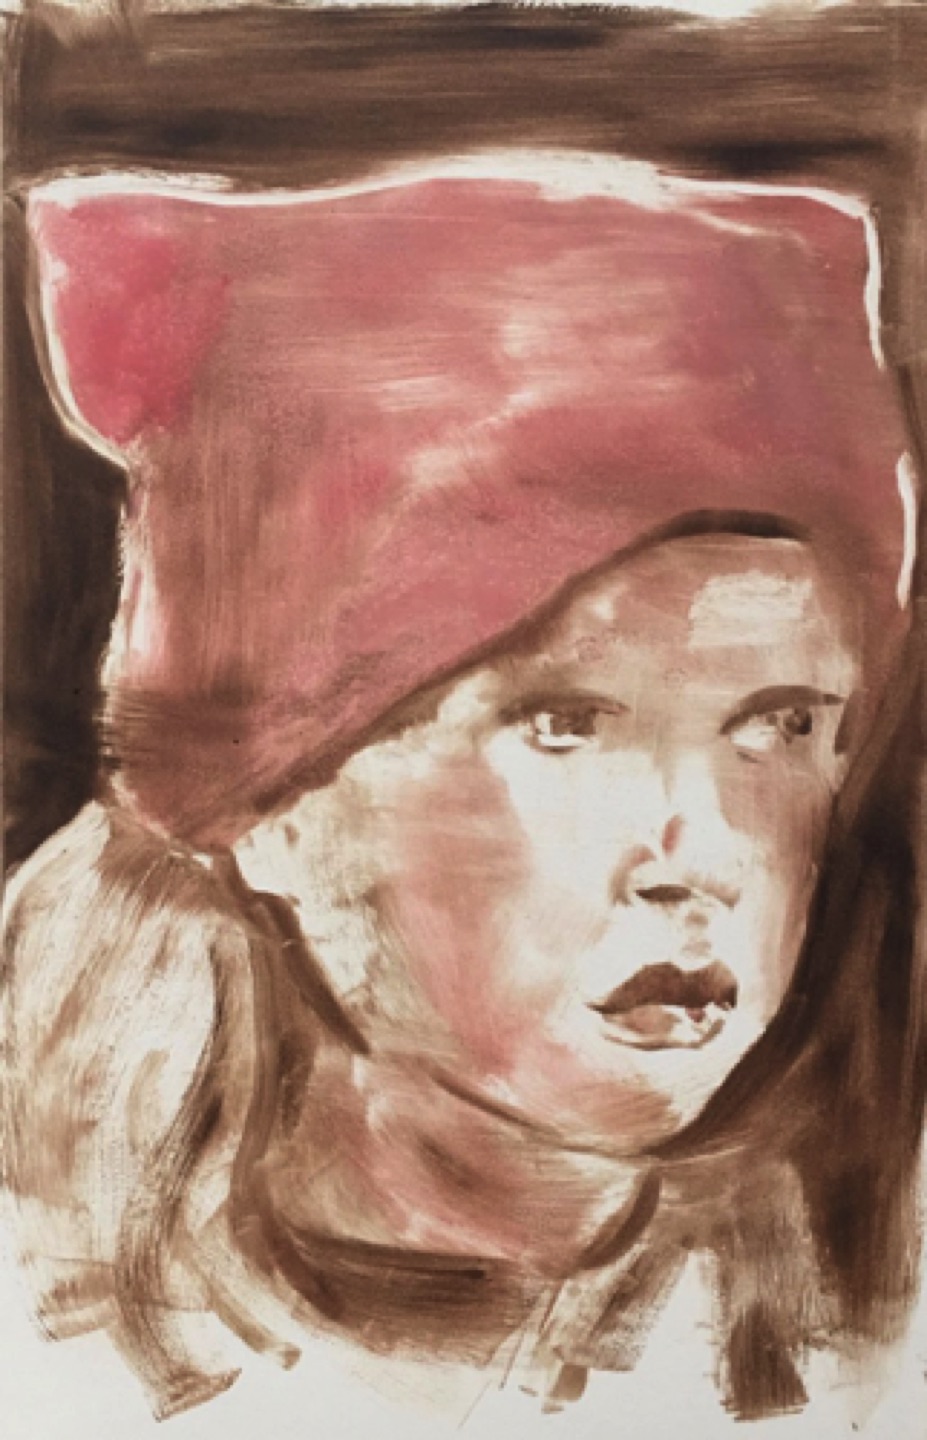 Gregg Chadwick
Generation Pink
30”x22” monotype on paper 2018 
Private Collection, Los Angeles, California